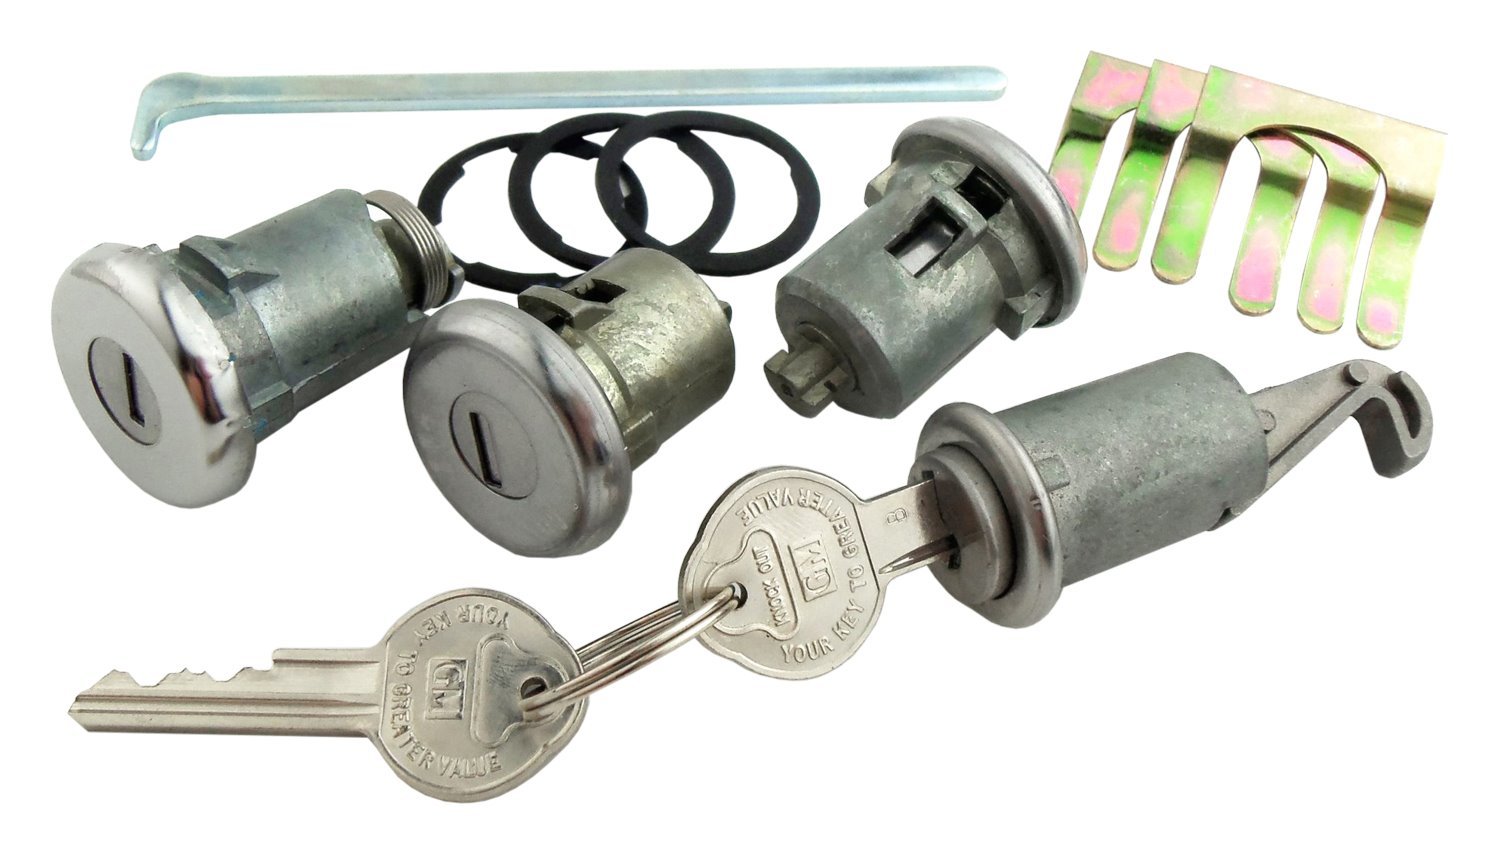 Door, Trunk & Glovebox Lock Set Fits Select 1967-1968 GM Models With Vertical Tail Panel Notches [Original Pearhead Keys]